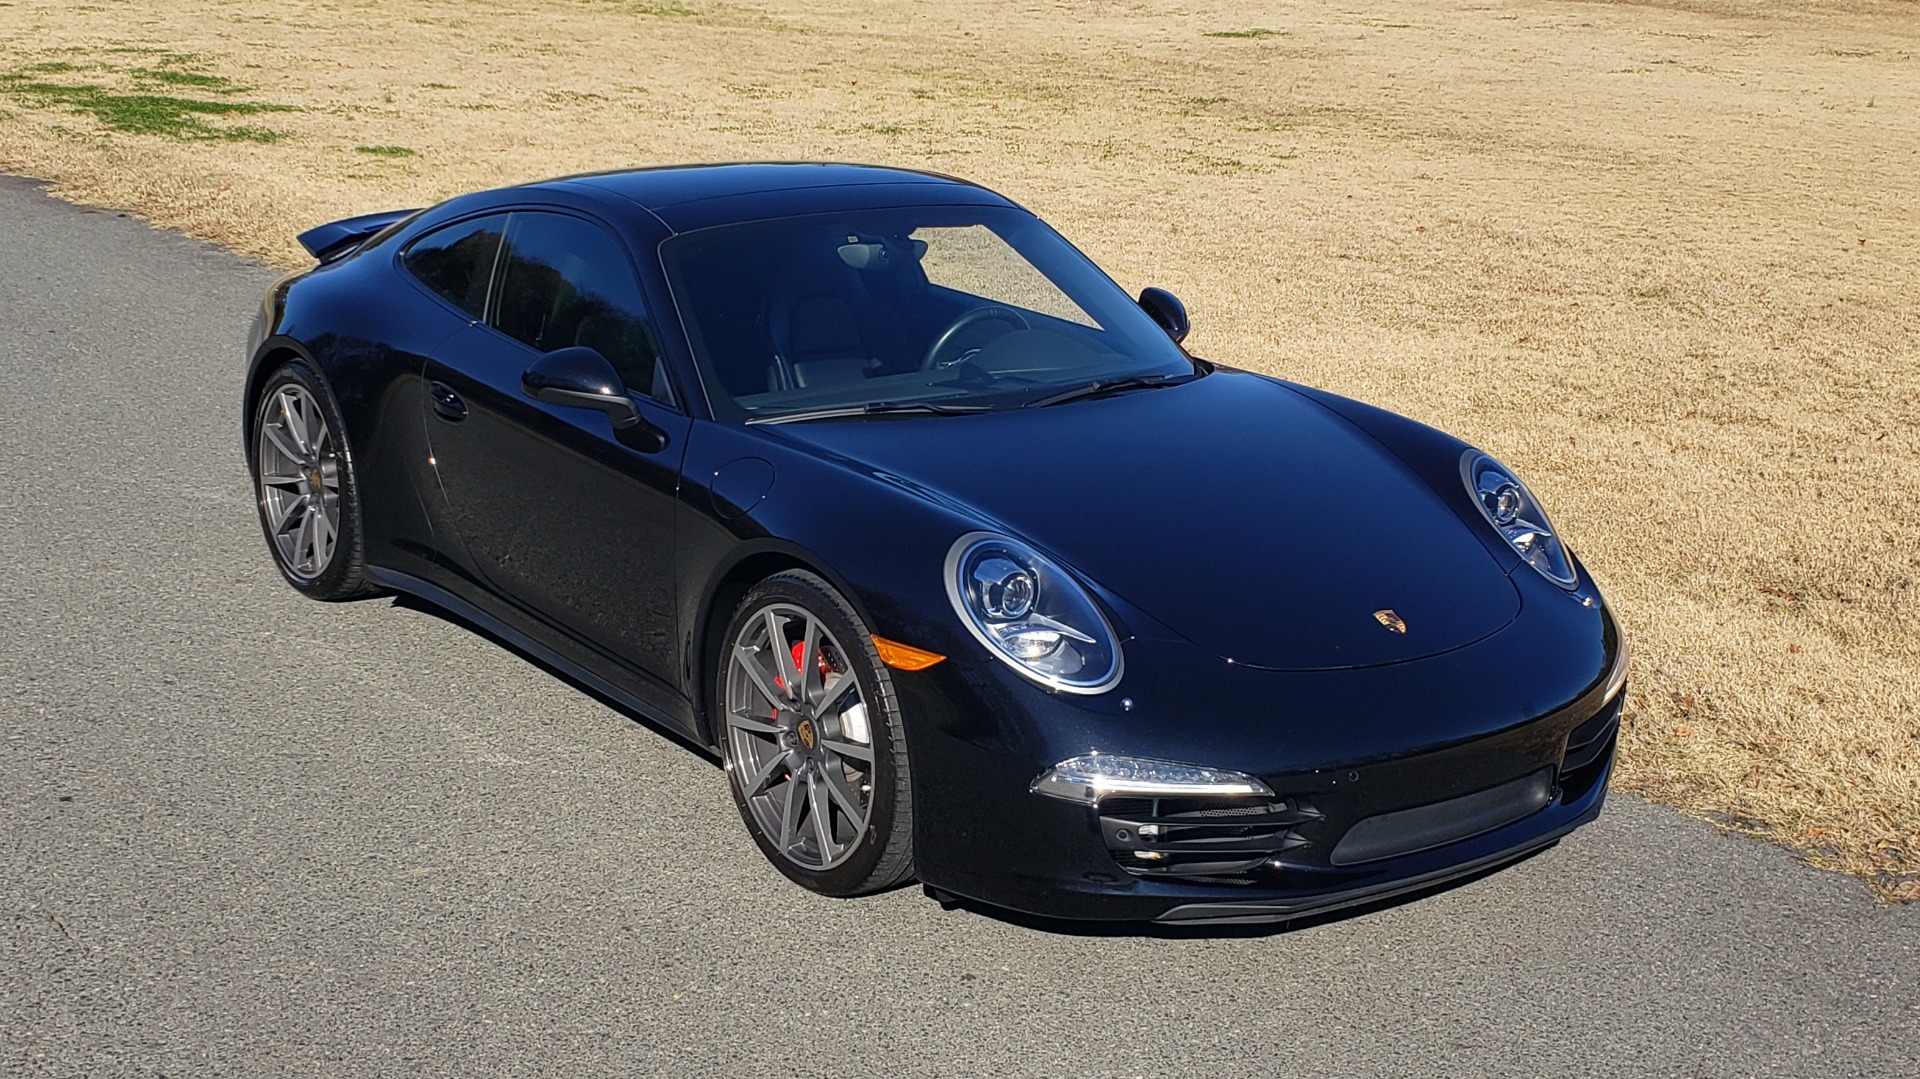 Used 2016 Porsche 911 CARRERA 4S PREM / NAV / CHRONO / BOSE / PDLS / SPORT EXH for sale Sold at Formula Imports in Charlotte NC 28227 2